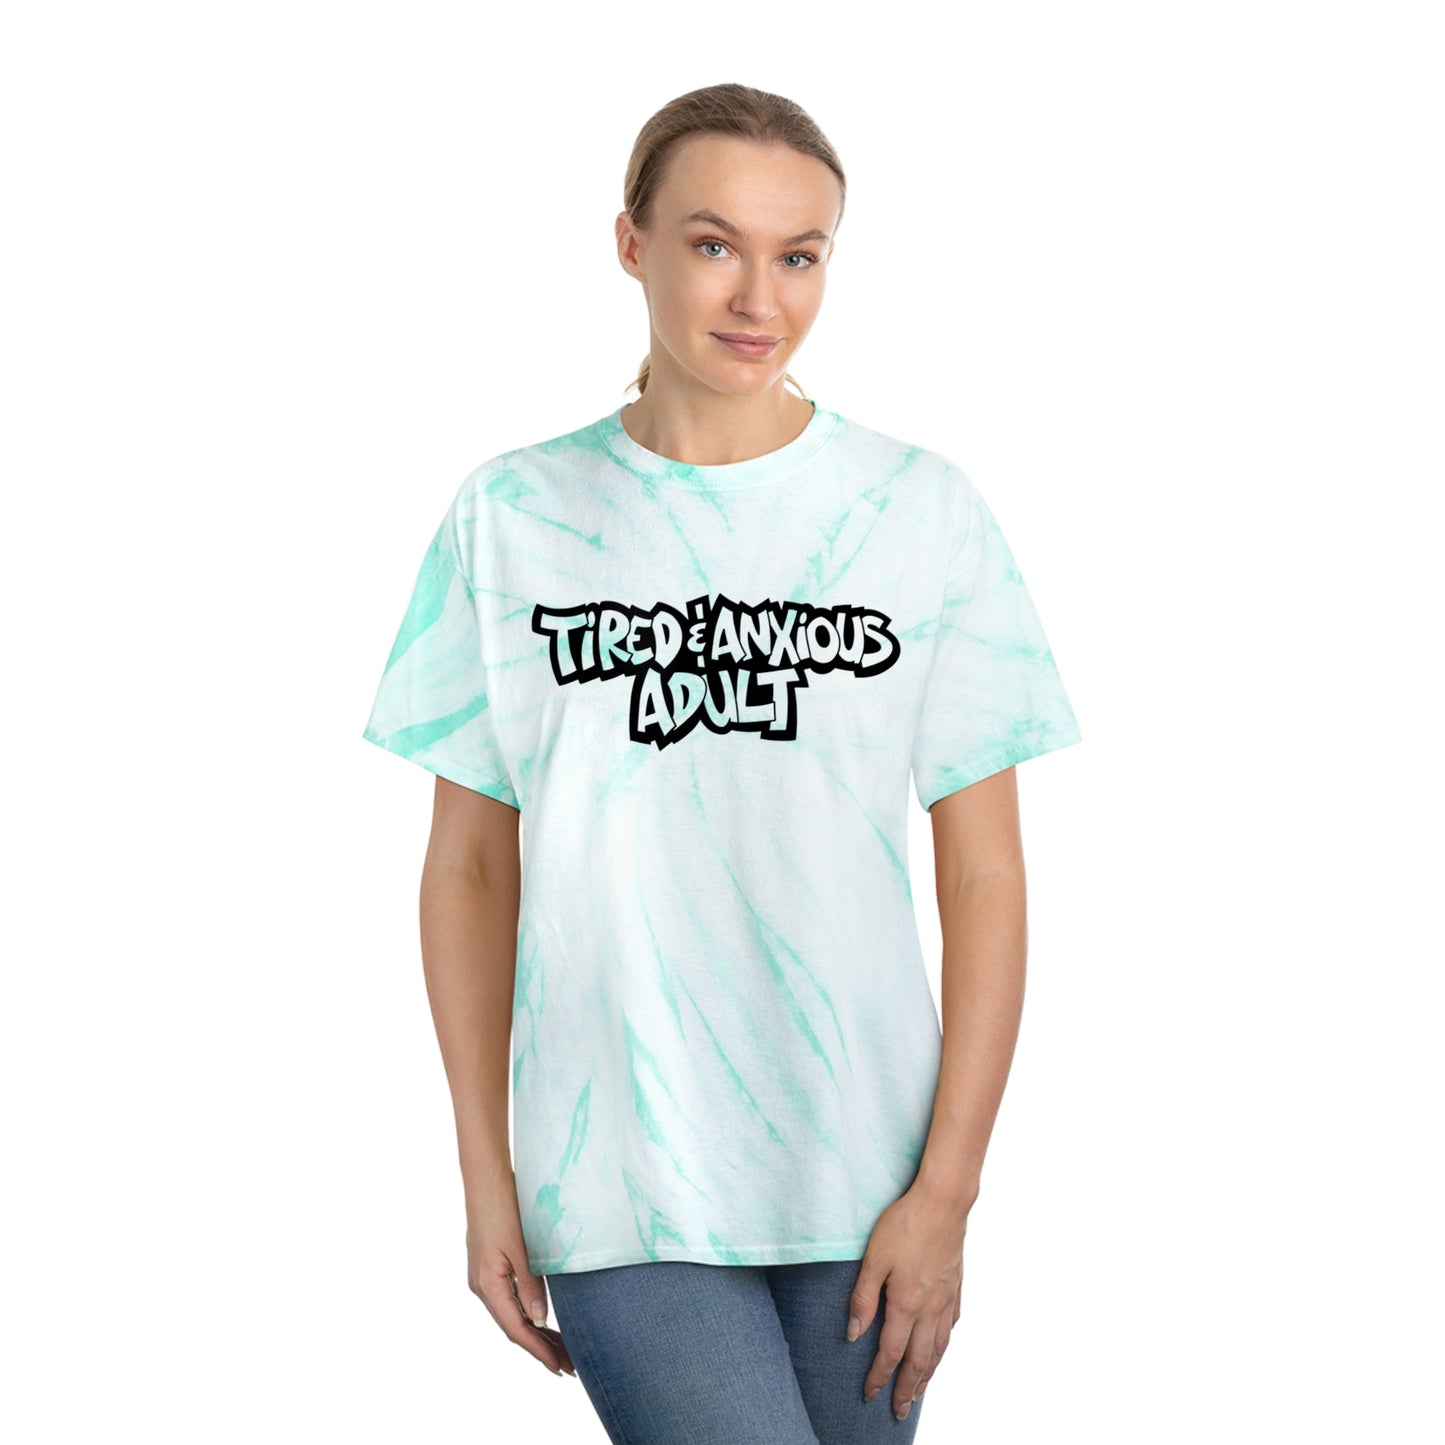 Tired & Anxious Adult tie-dye t-shirt